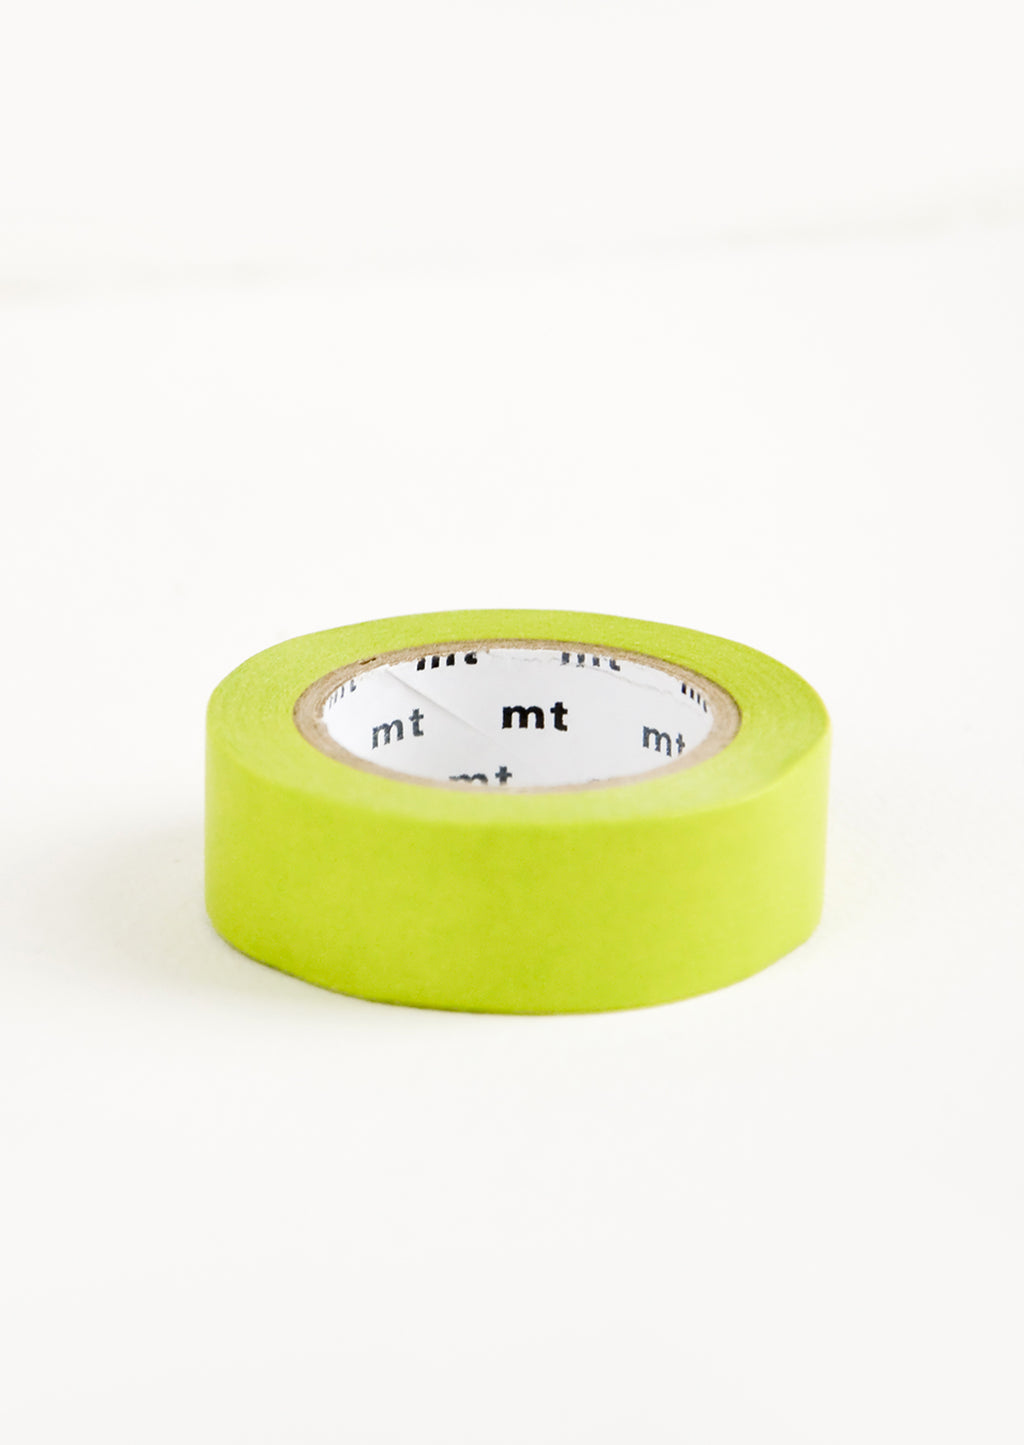 Lime: A roll of washi tape in lime green.